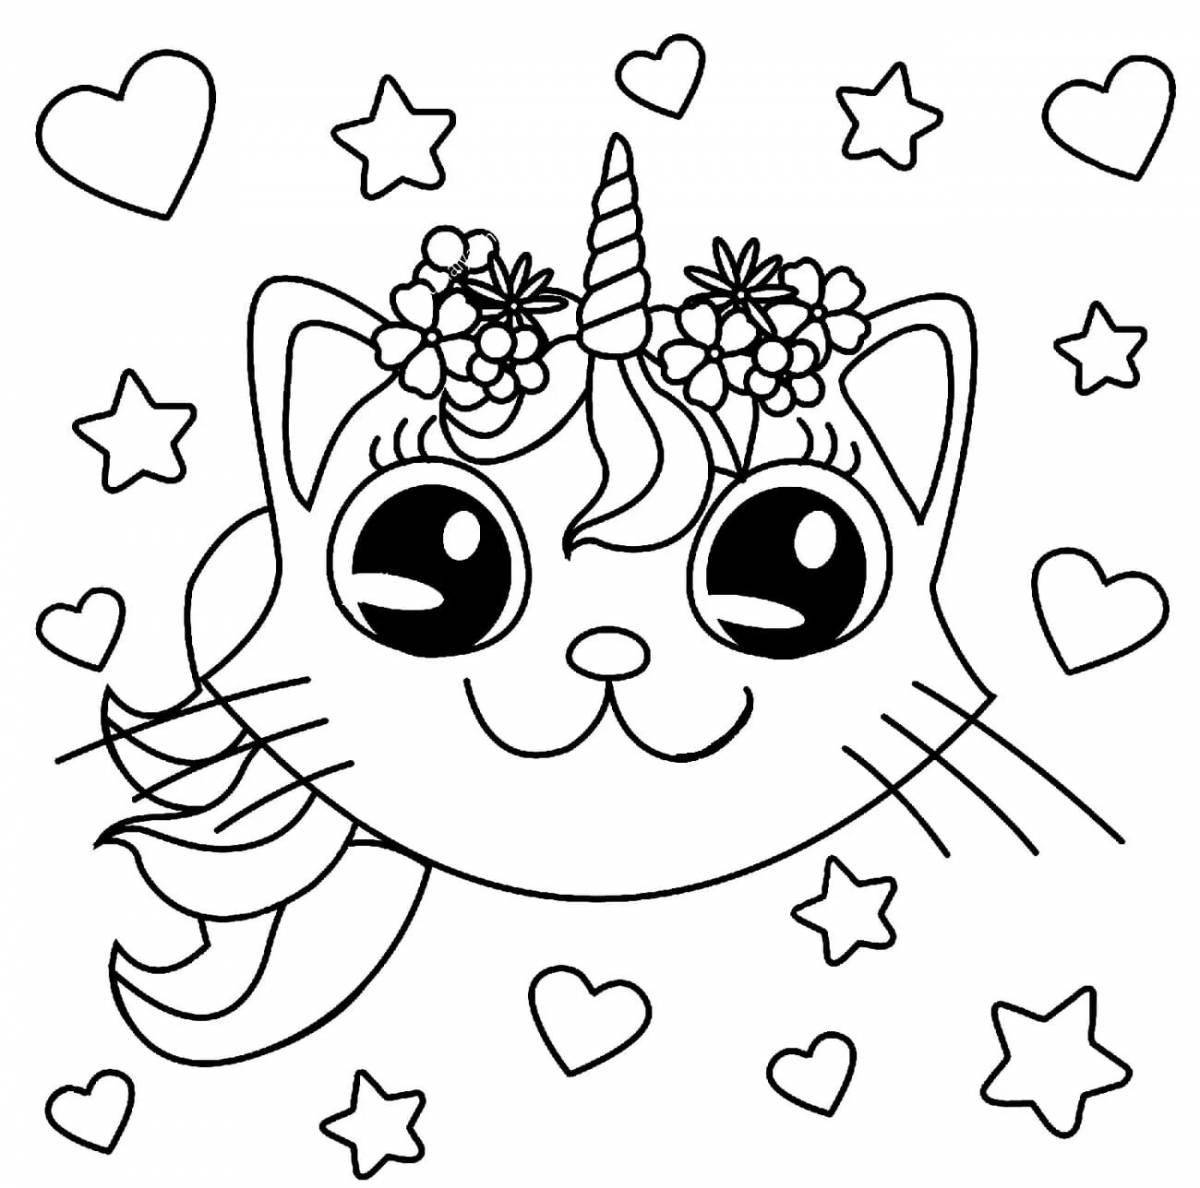 Felicity shining cat coloring page